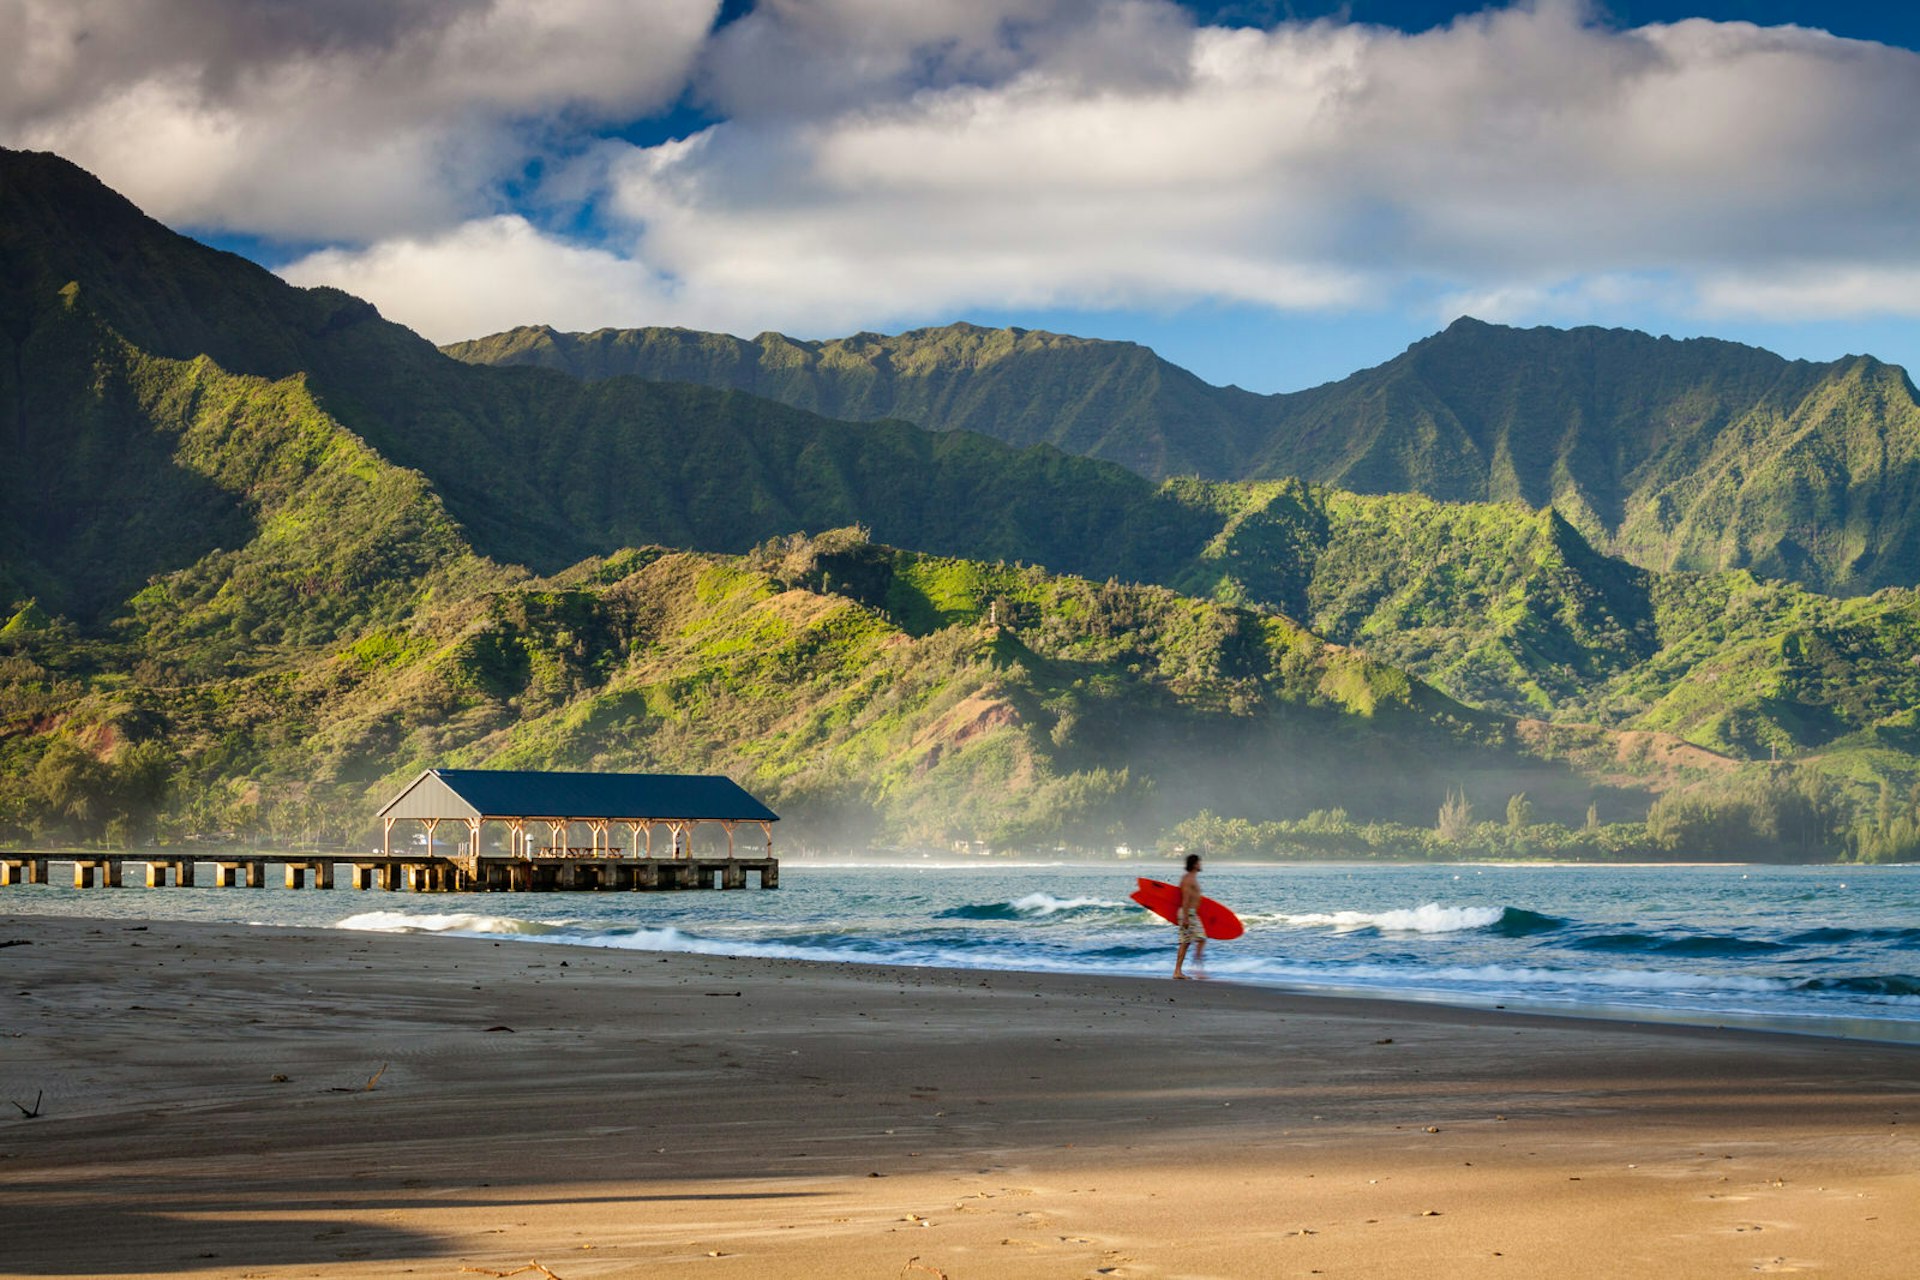 Surfer on a beach in Hawaii © Glowing Earth Photography / 500px 